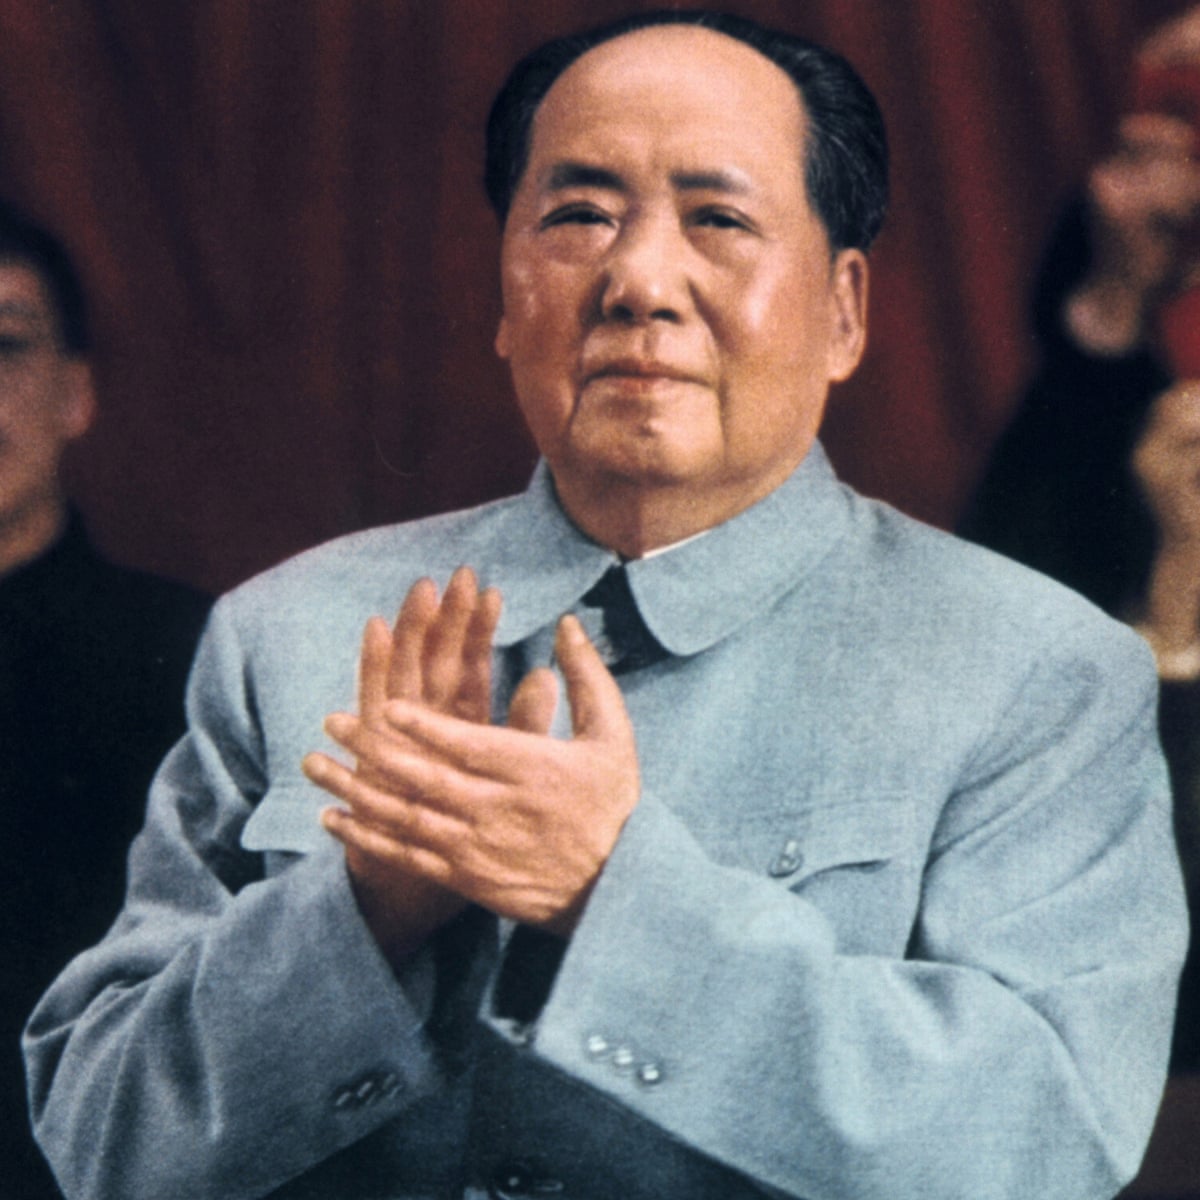 Historic Mao letter set to fetch more than £100,000 at auction | China |  The Guardian